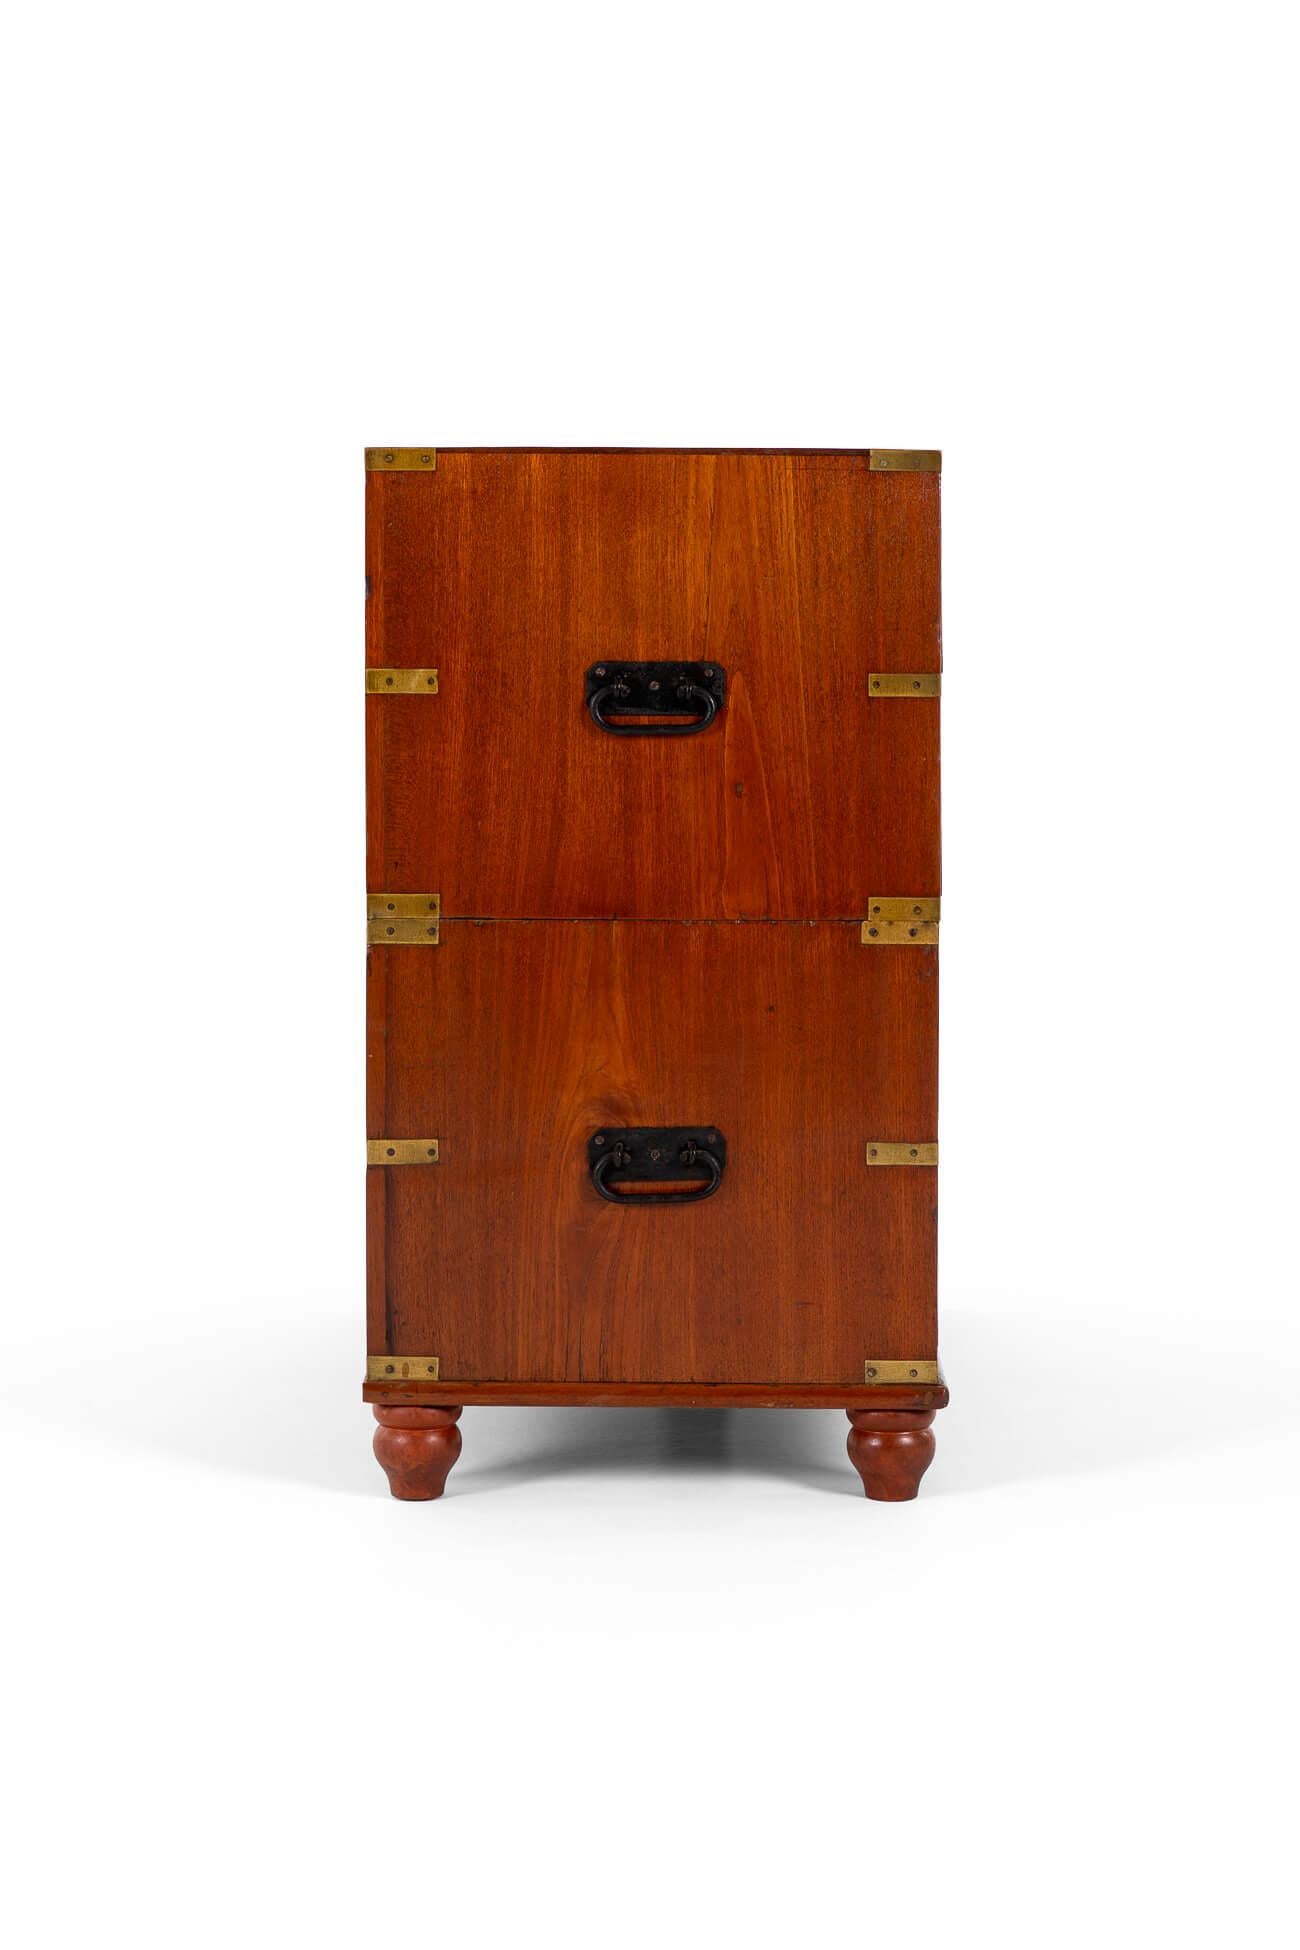 Hand-Crafted 19th Century Teak Campaign Chest For Sale